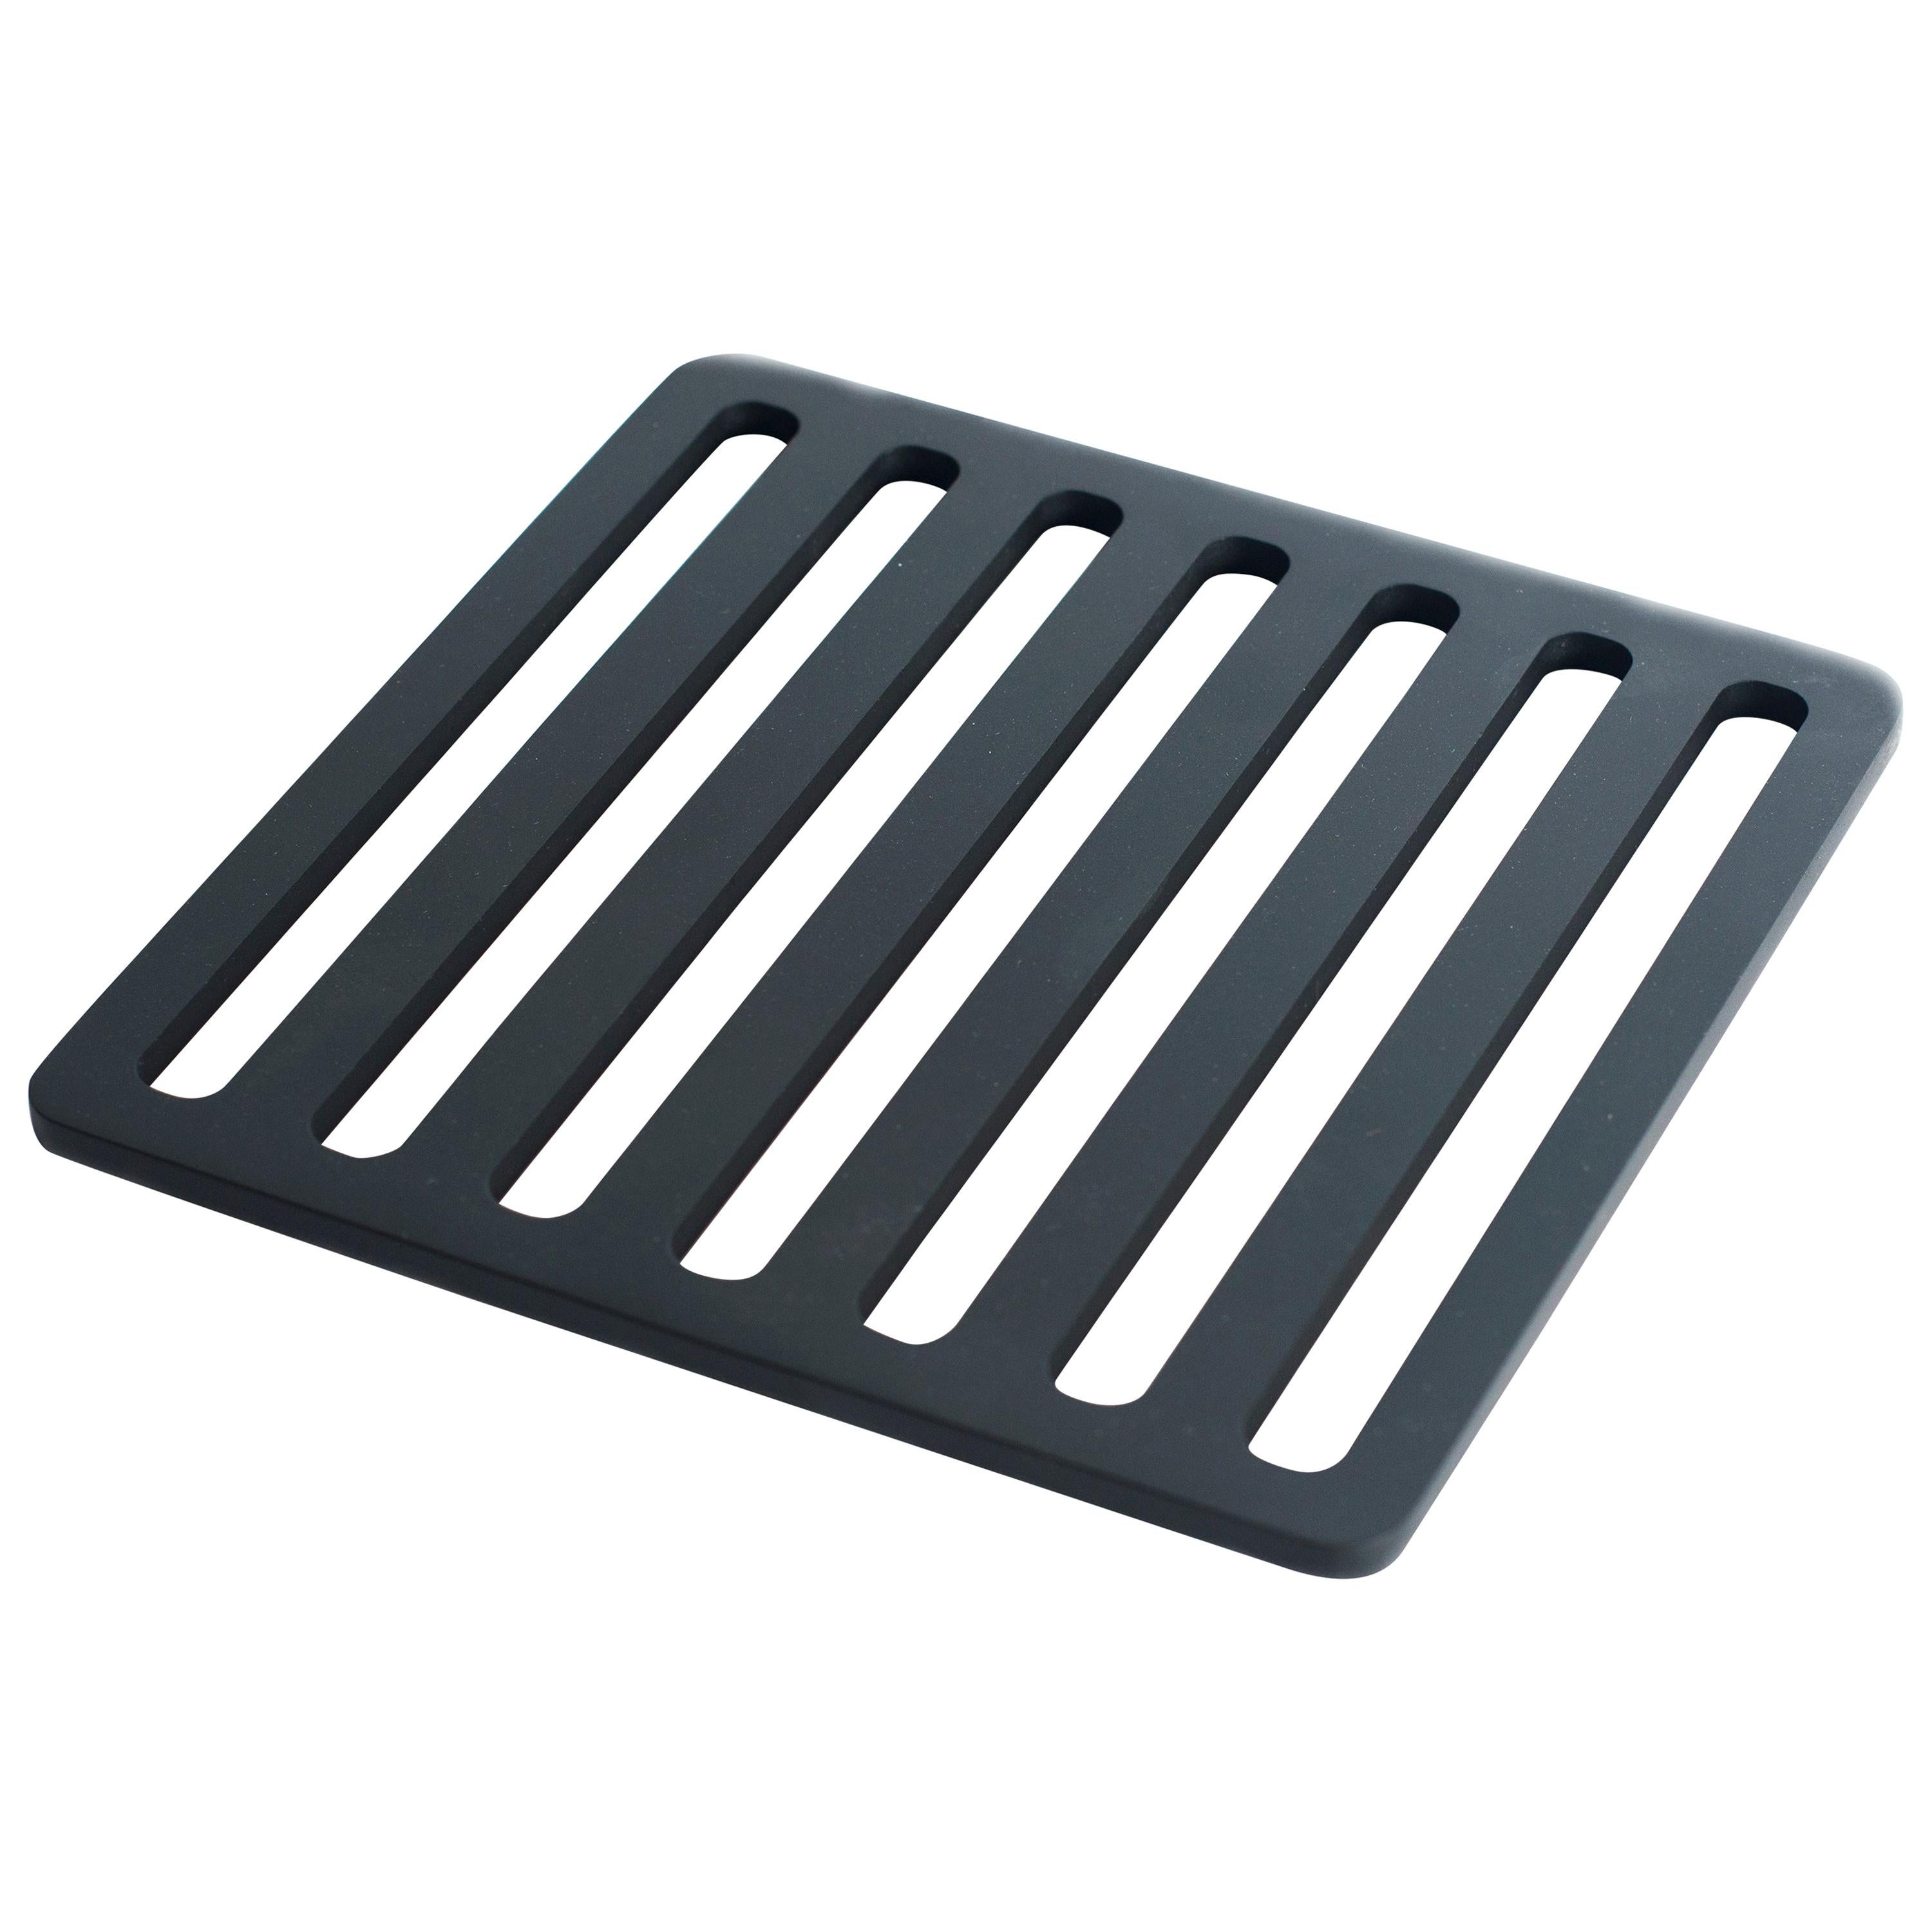 fferrone Contemporary Handcrafted Trivet of Anodized Aluminum